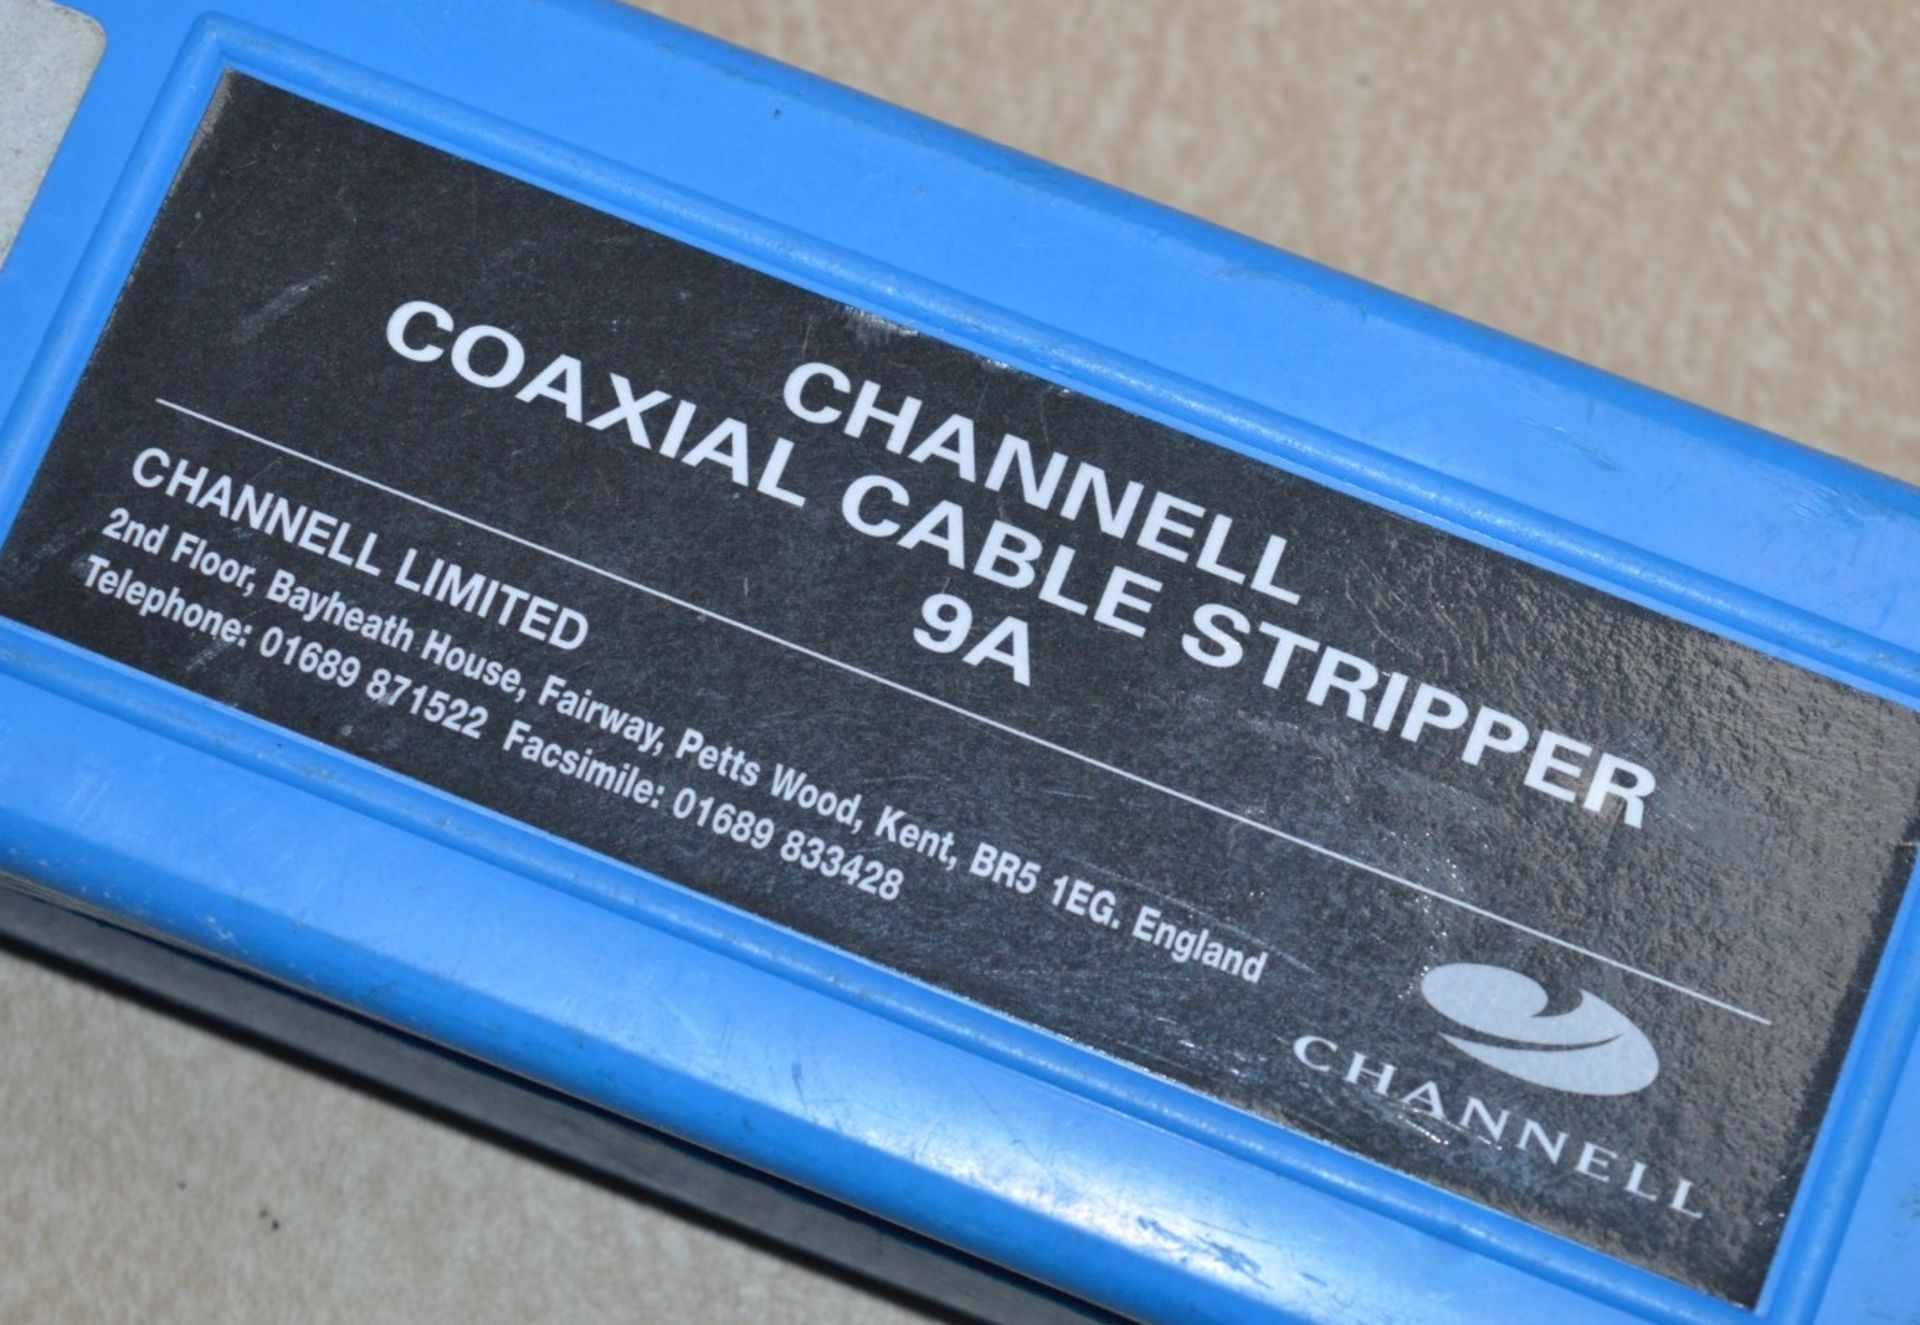 4 x Channell Coaxial Cable Strippers - Model 9A - In Cases With Accessories - CL011 - Ref JP936 - - Image 5 of 6